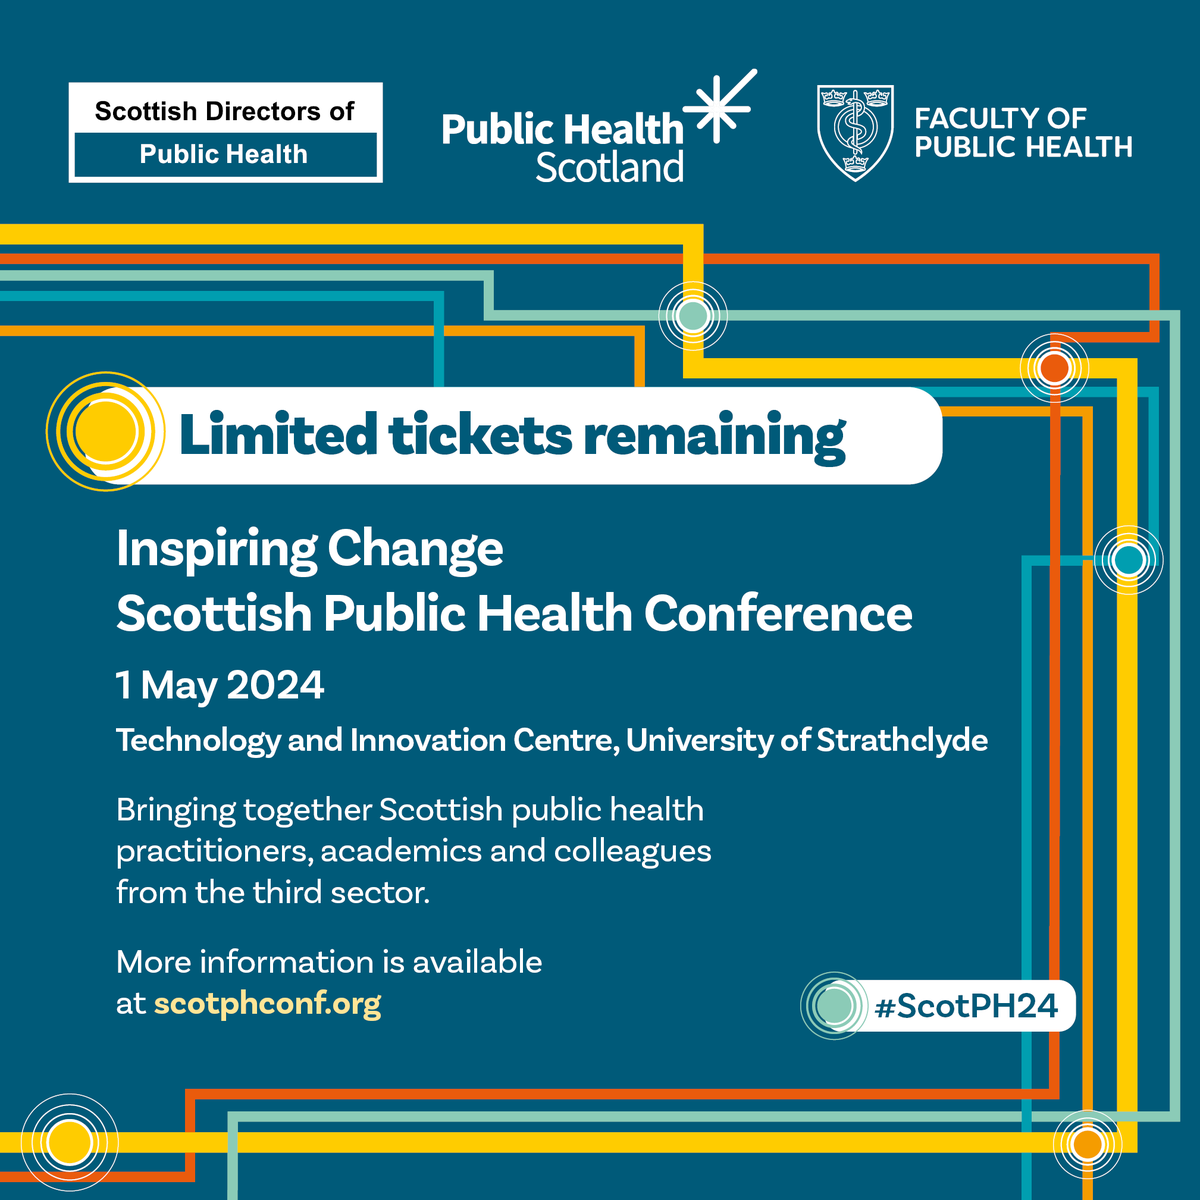 There are limited tickets remaining for our #ScotPH24 conference with @P_H_S_Official & the Scottish Directors of Public Health Group. Taking place 1 May '24 in Glasgow, this conference will bring together the public health family in Scotland and beyond! scotphconf.org